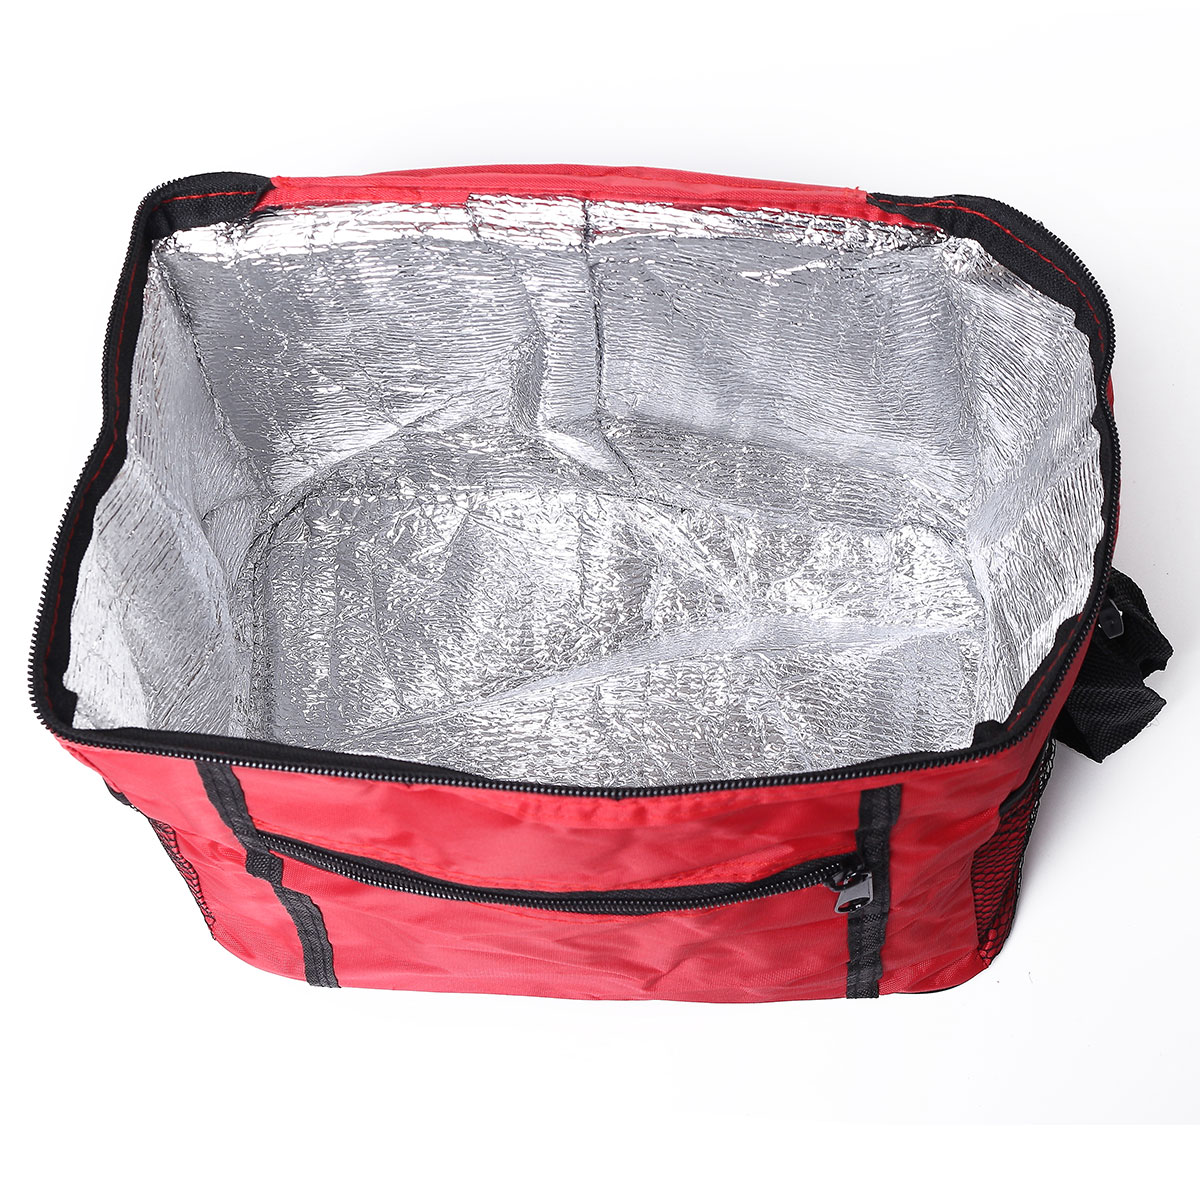 Thermal Outdoor Cooler Lunch Box Insulated Picnic Bag Camping Hiking ...